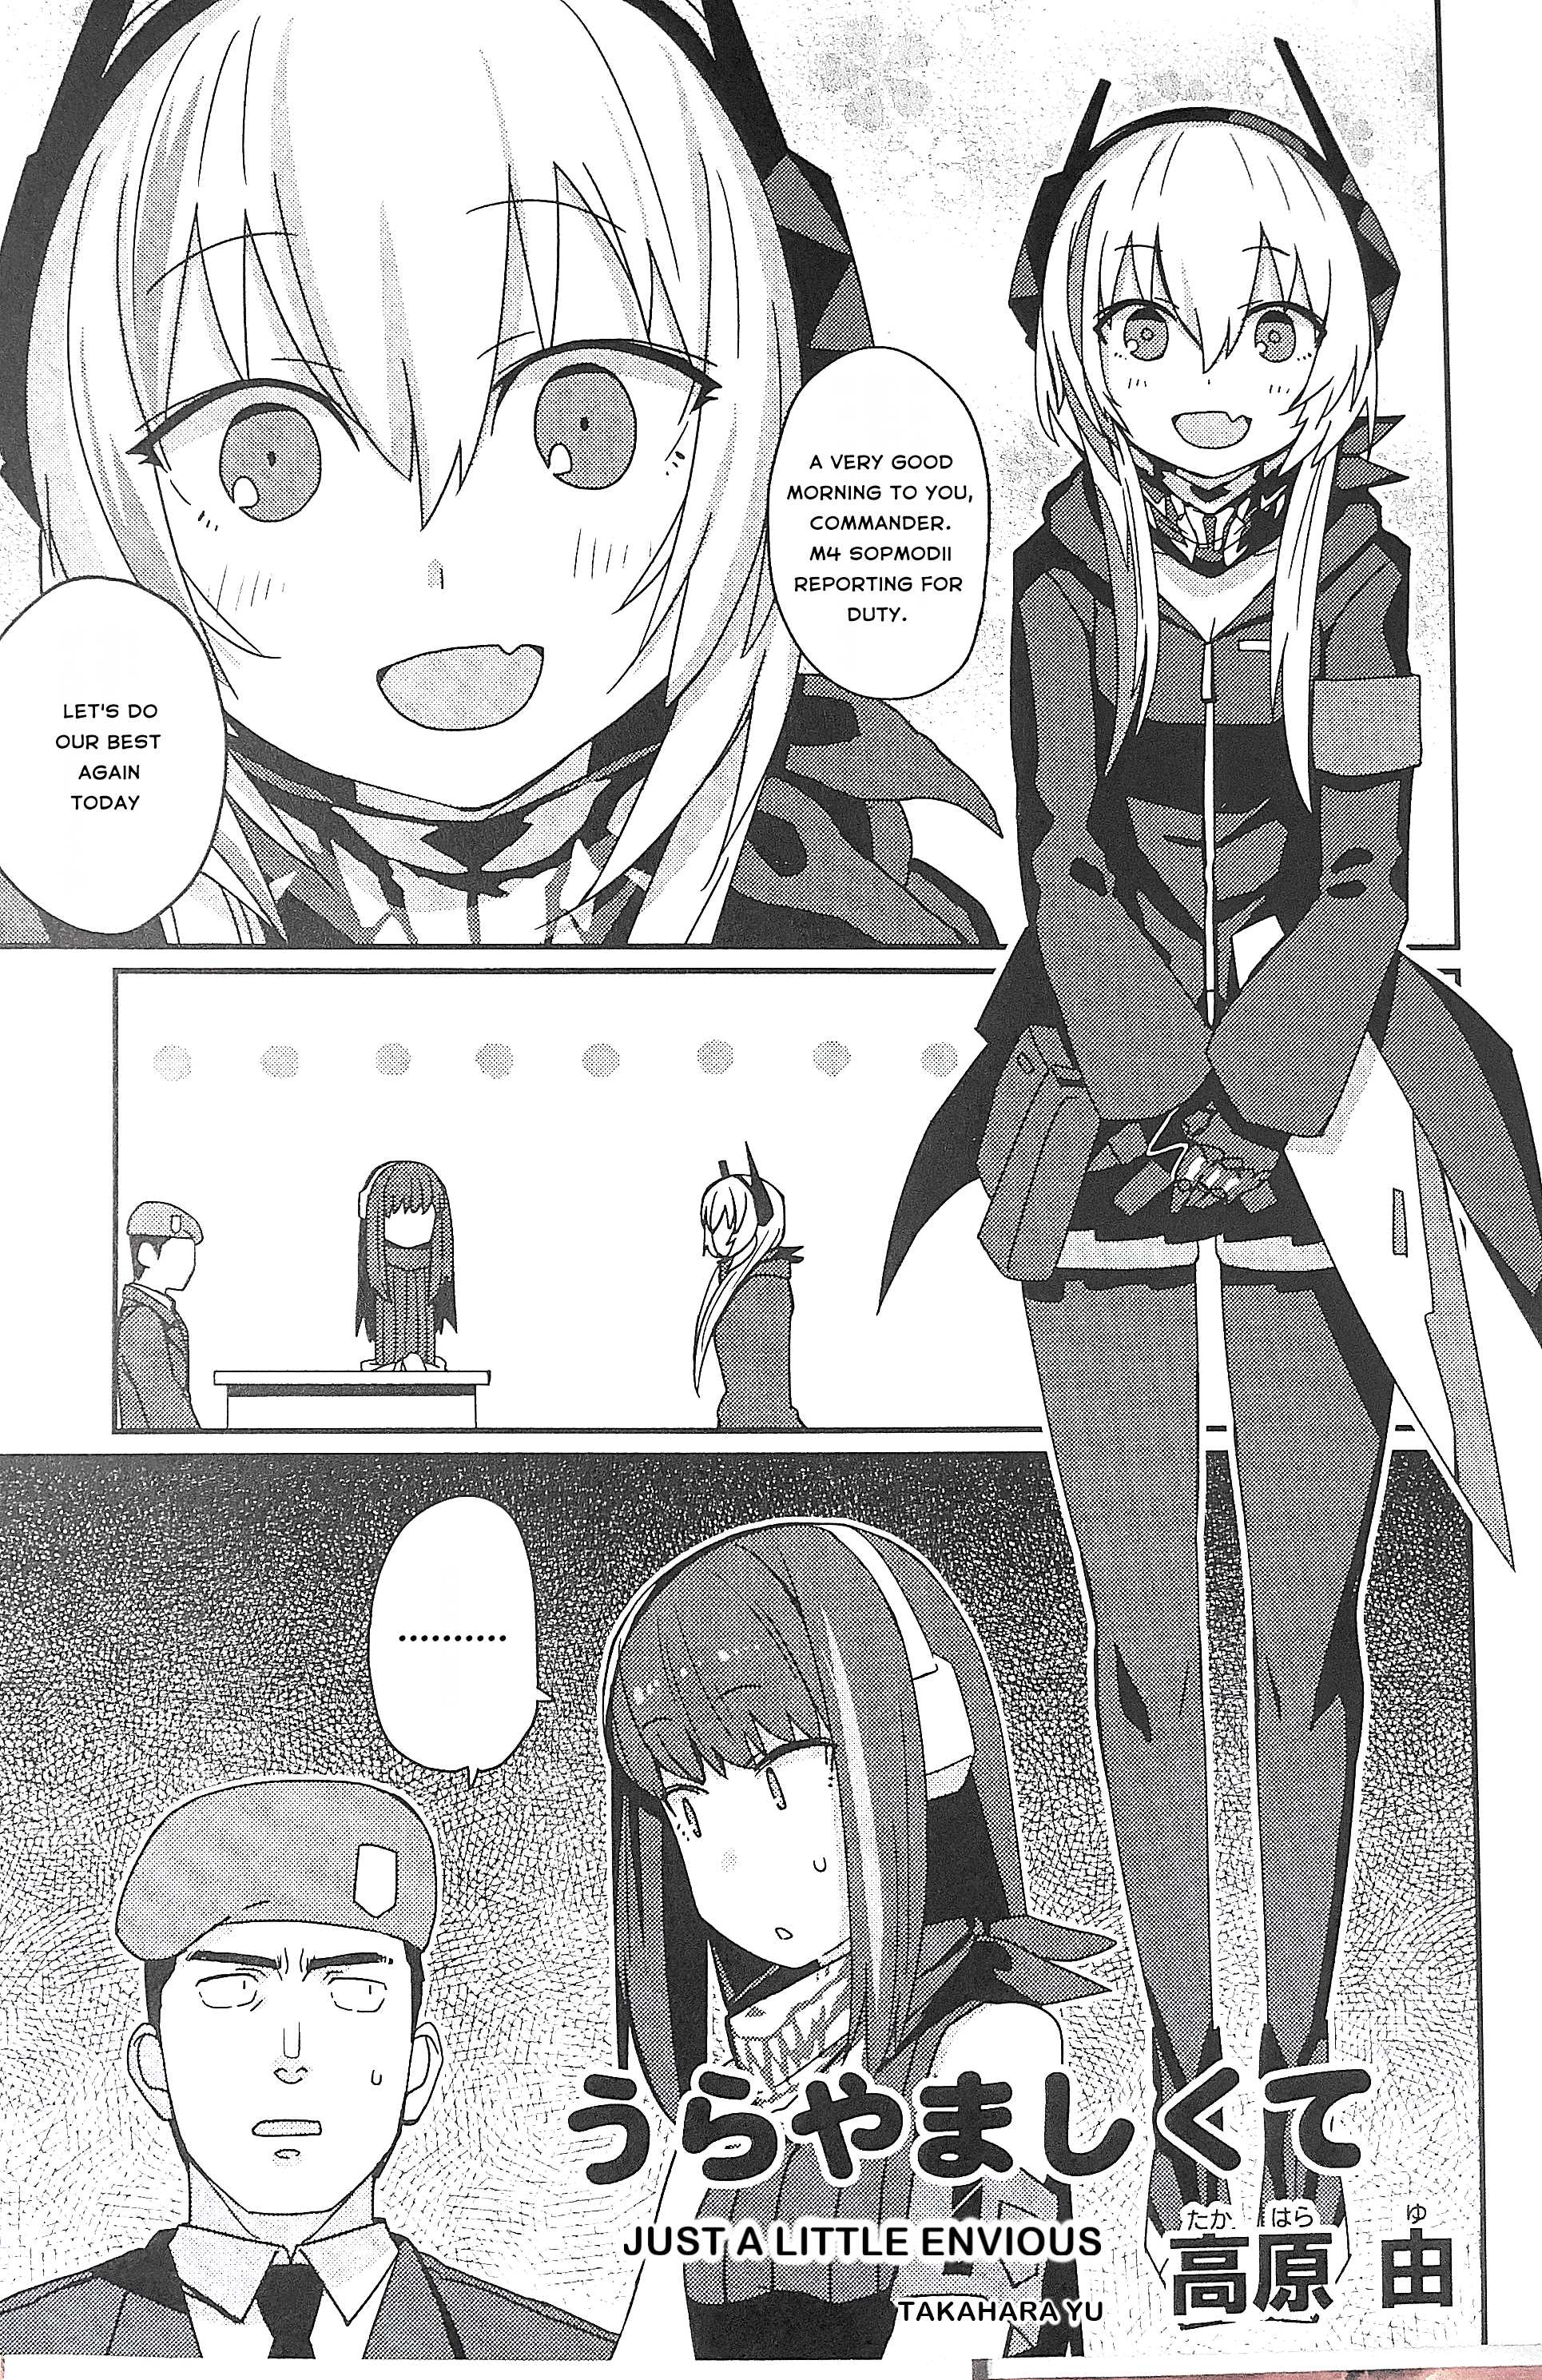 Dolls Frontline Comic Anthology - DNA Media 2019 - Chapter 21937 - Just a Little Envious - Image 1